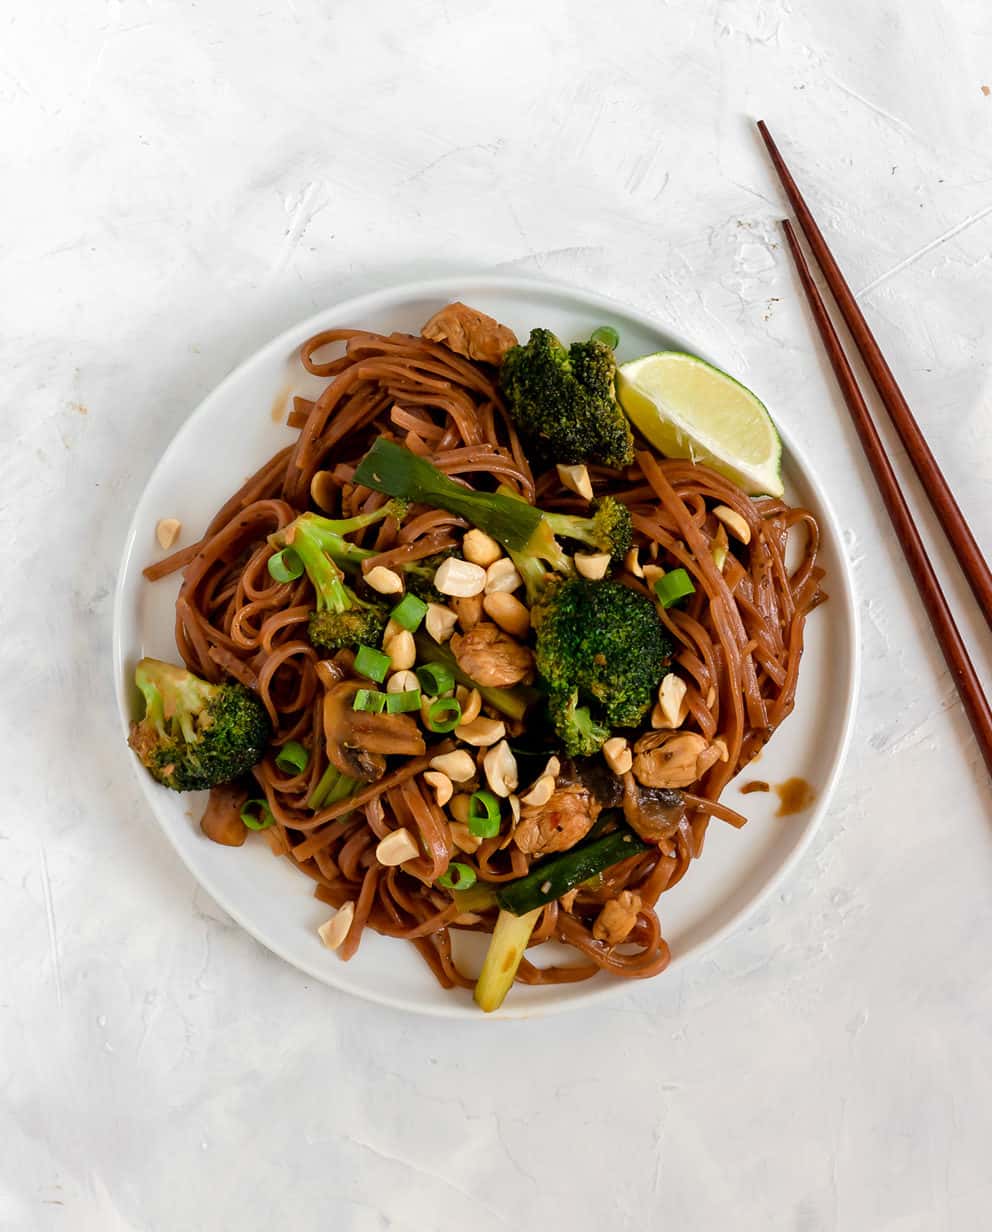 Deliciously spicy with hints of sweetness, these 20 Minute Spicy Thai Noodles super simple and perfect for a quick weeknight meal! (gluten free, dairy free)